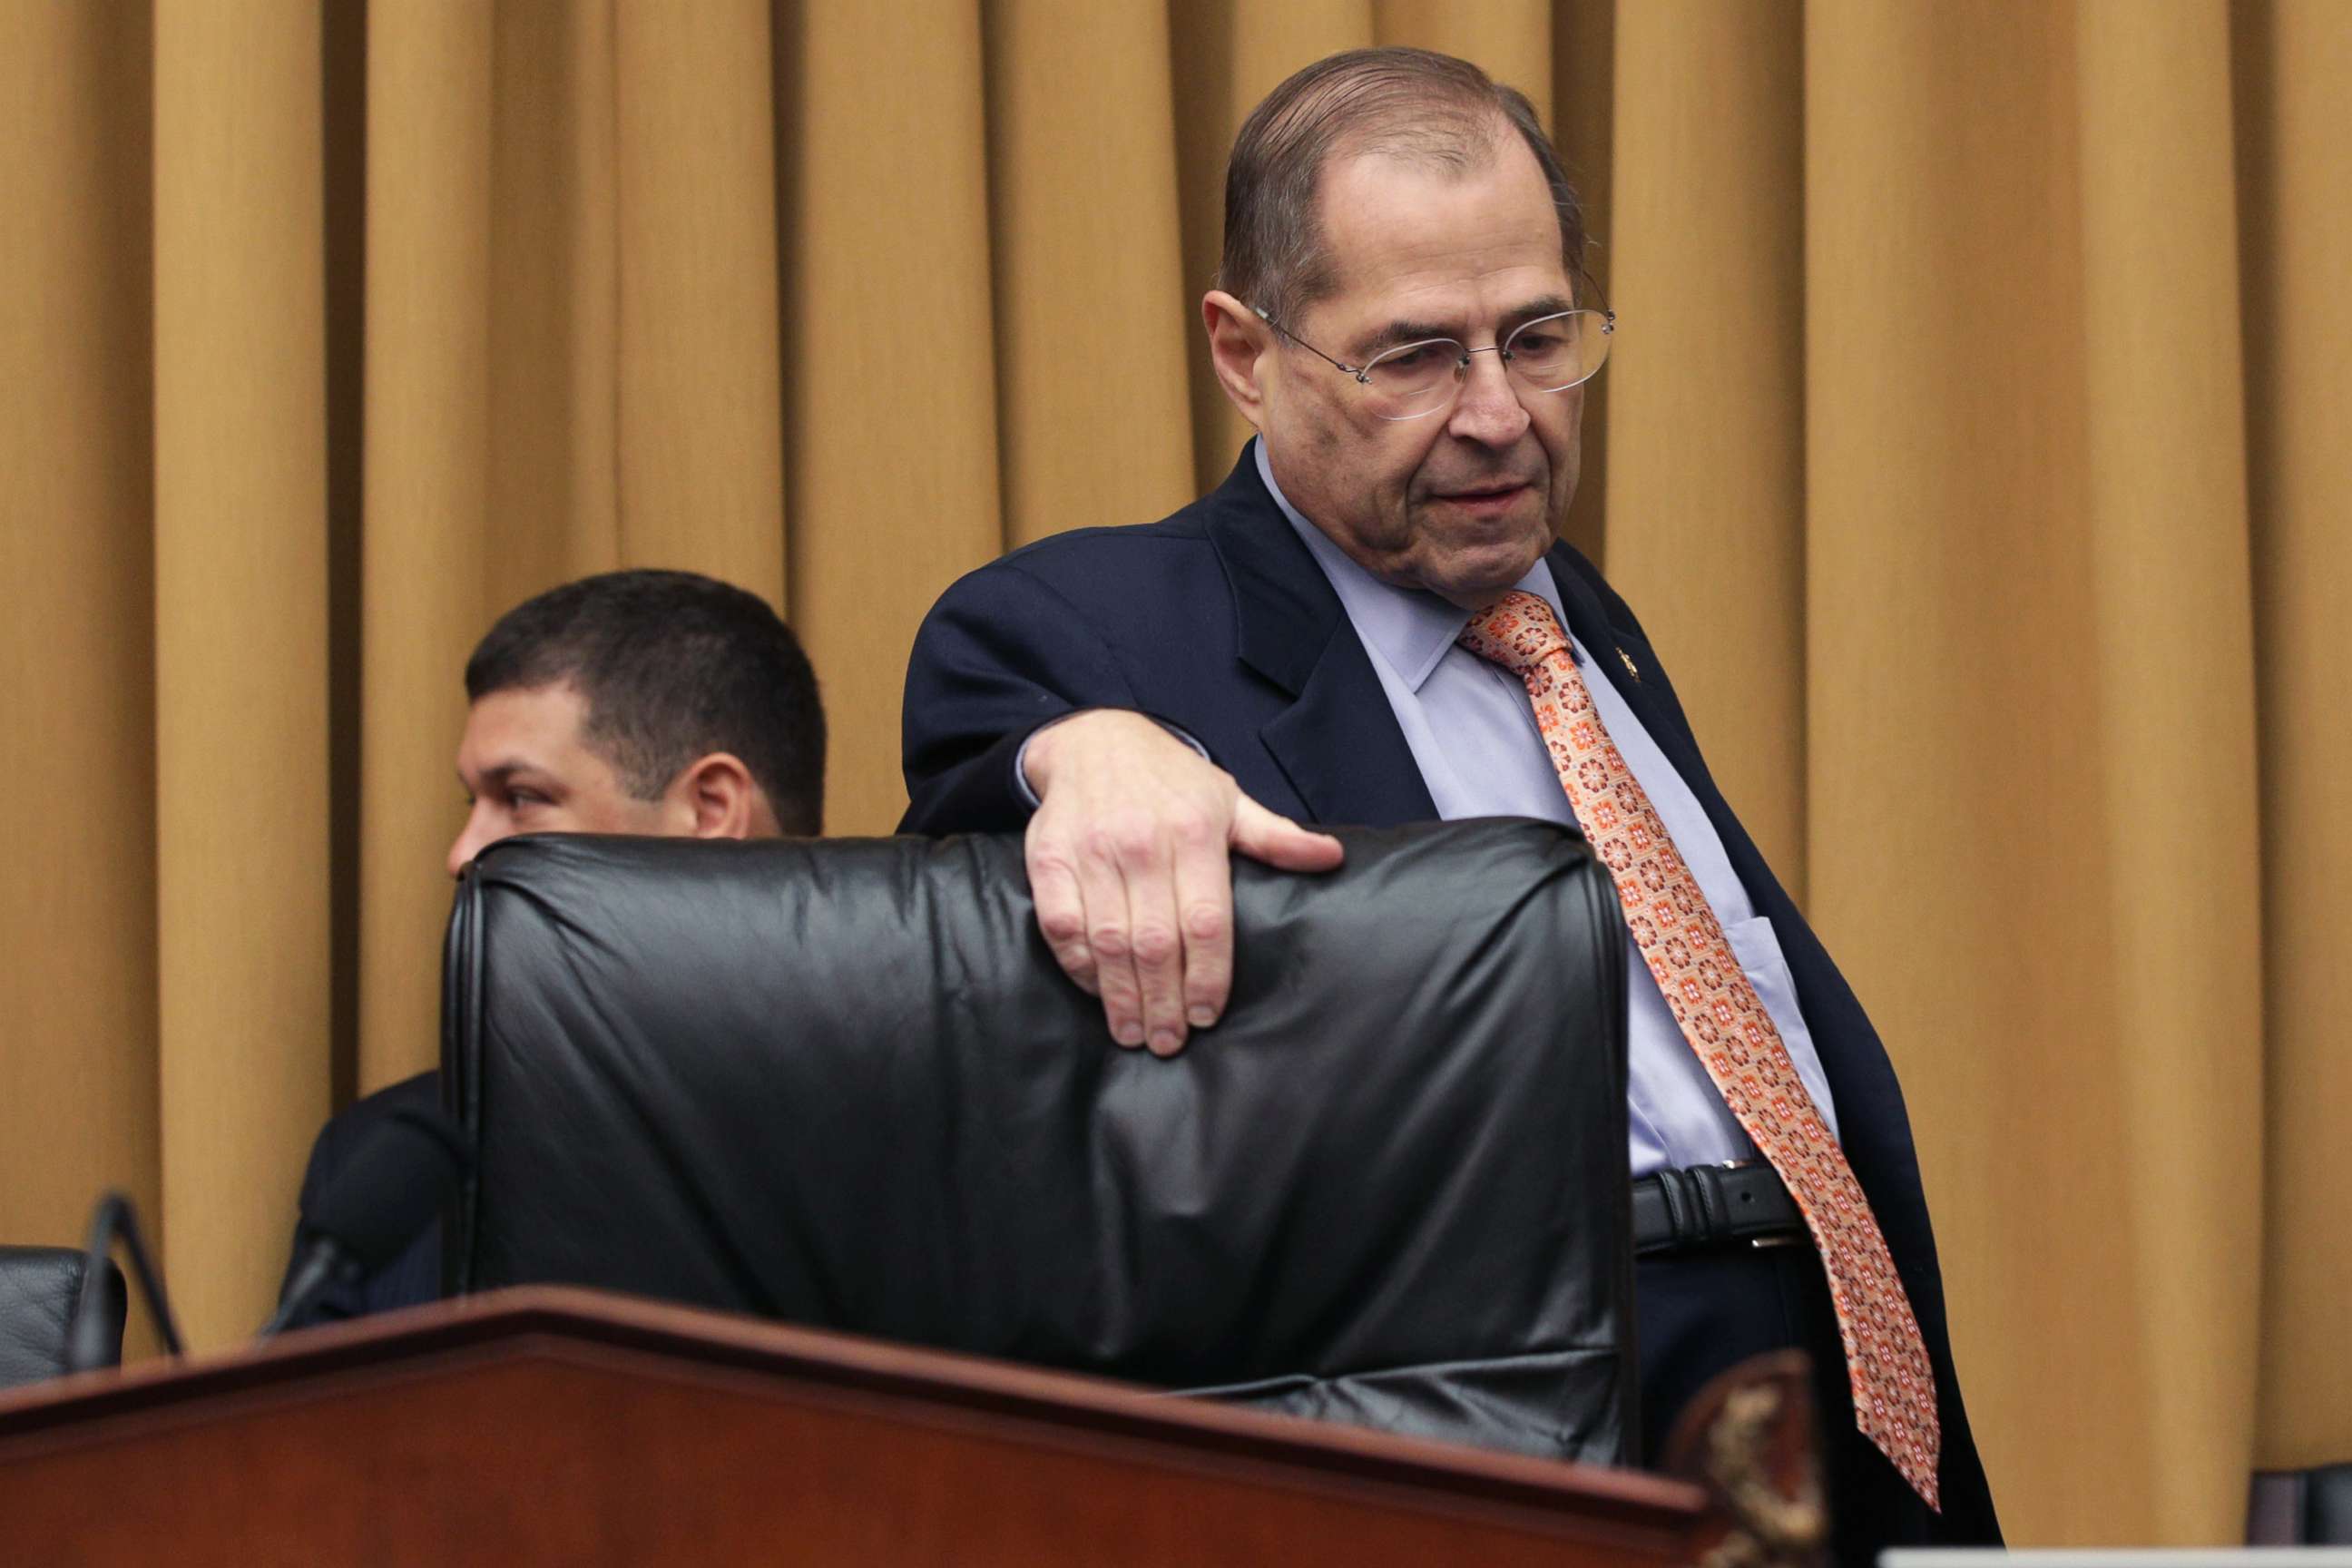 PHOTO: Chairman of the House Judiciary Committee Rep. Jerry Nadler arrives at a hearing in which former White House Counsel Don McGahn was subpoenaed to testify, May 21, 2019 on Capitol Hill in Washington, D.C.